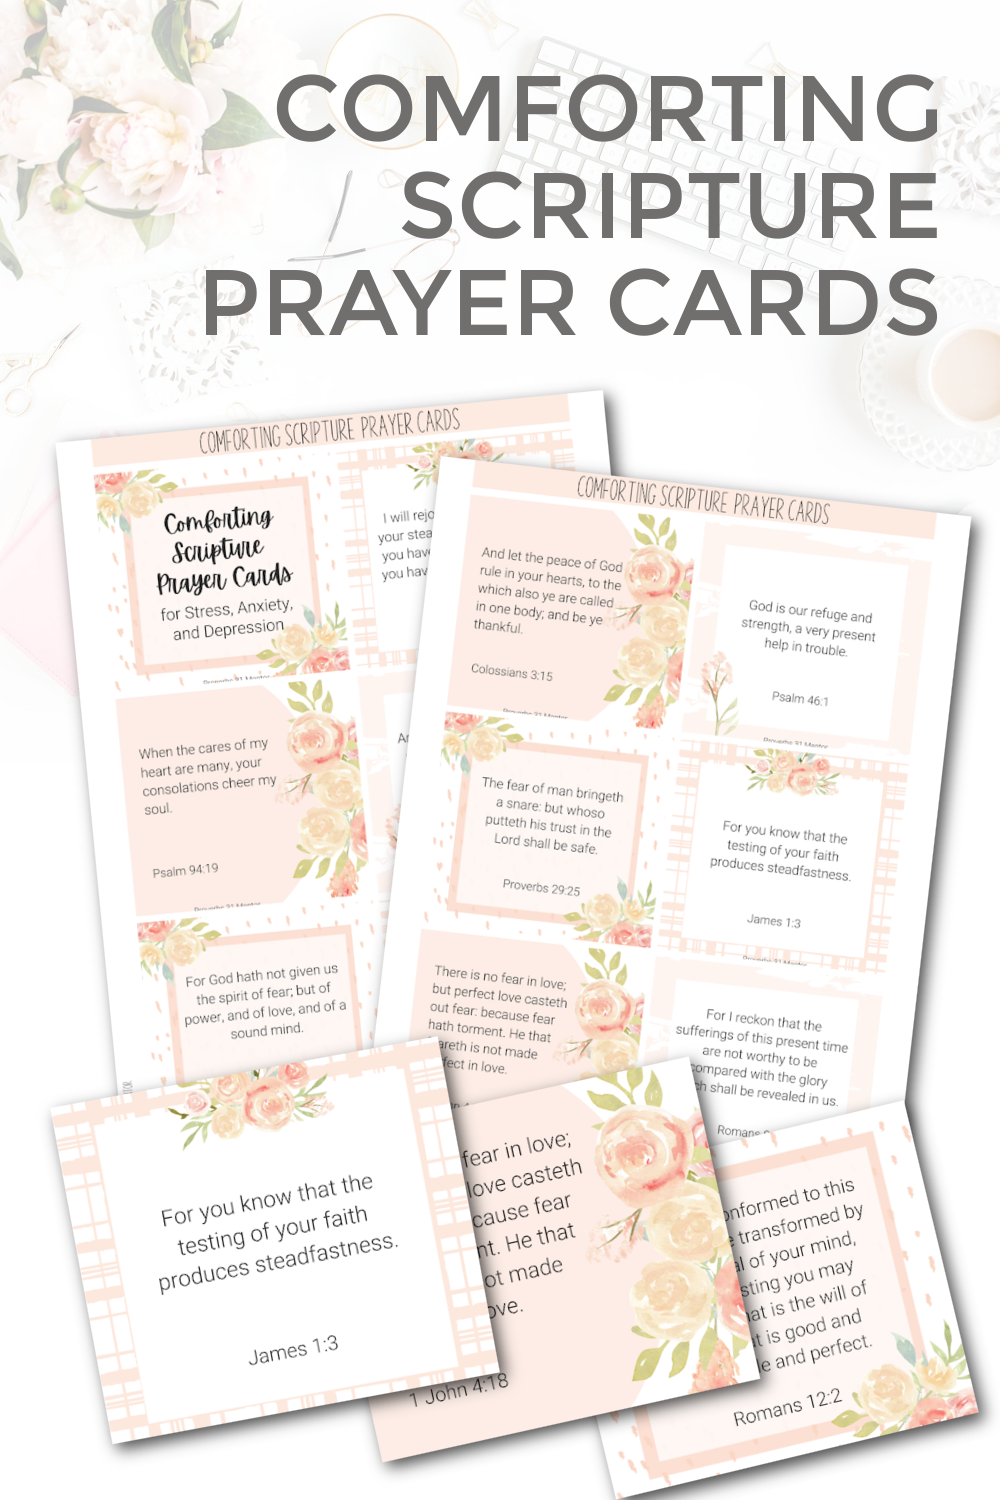 Comforting Scripture Prayer Cards for Stress, Anxiety, and Depression